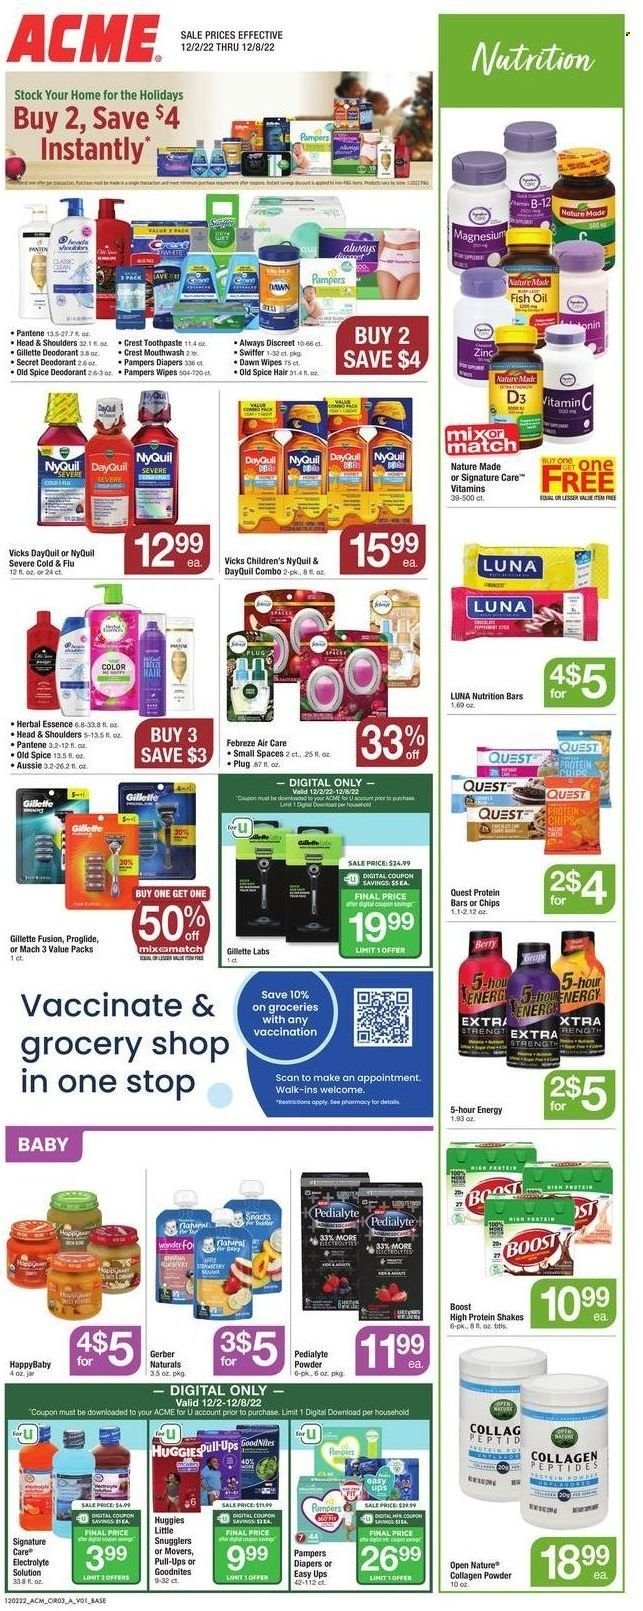 thumbnail - ACME Flyer - 12/02/2022 - 12/08/2022 - Sales products - protein drink, shake, snack, Gerber, chips, nutrition bar, protein bar, spice, oil, Boost, wipes, Huggies, Pampers, nappies, Febreze, Swiffer, XTRA, Old Spice, toothpaste, mouthwash, Crest, Always Discreet, Aussie, Head & Shoulders, Pantene, anti-perspirant, deodorant, Gillette, Vicks, DayQuil, Cold & Flu, fish oil, magnesium, Nature Made, vitamin c, NyQuil, zinc, vitamin D3. Page 4.